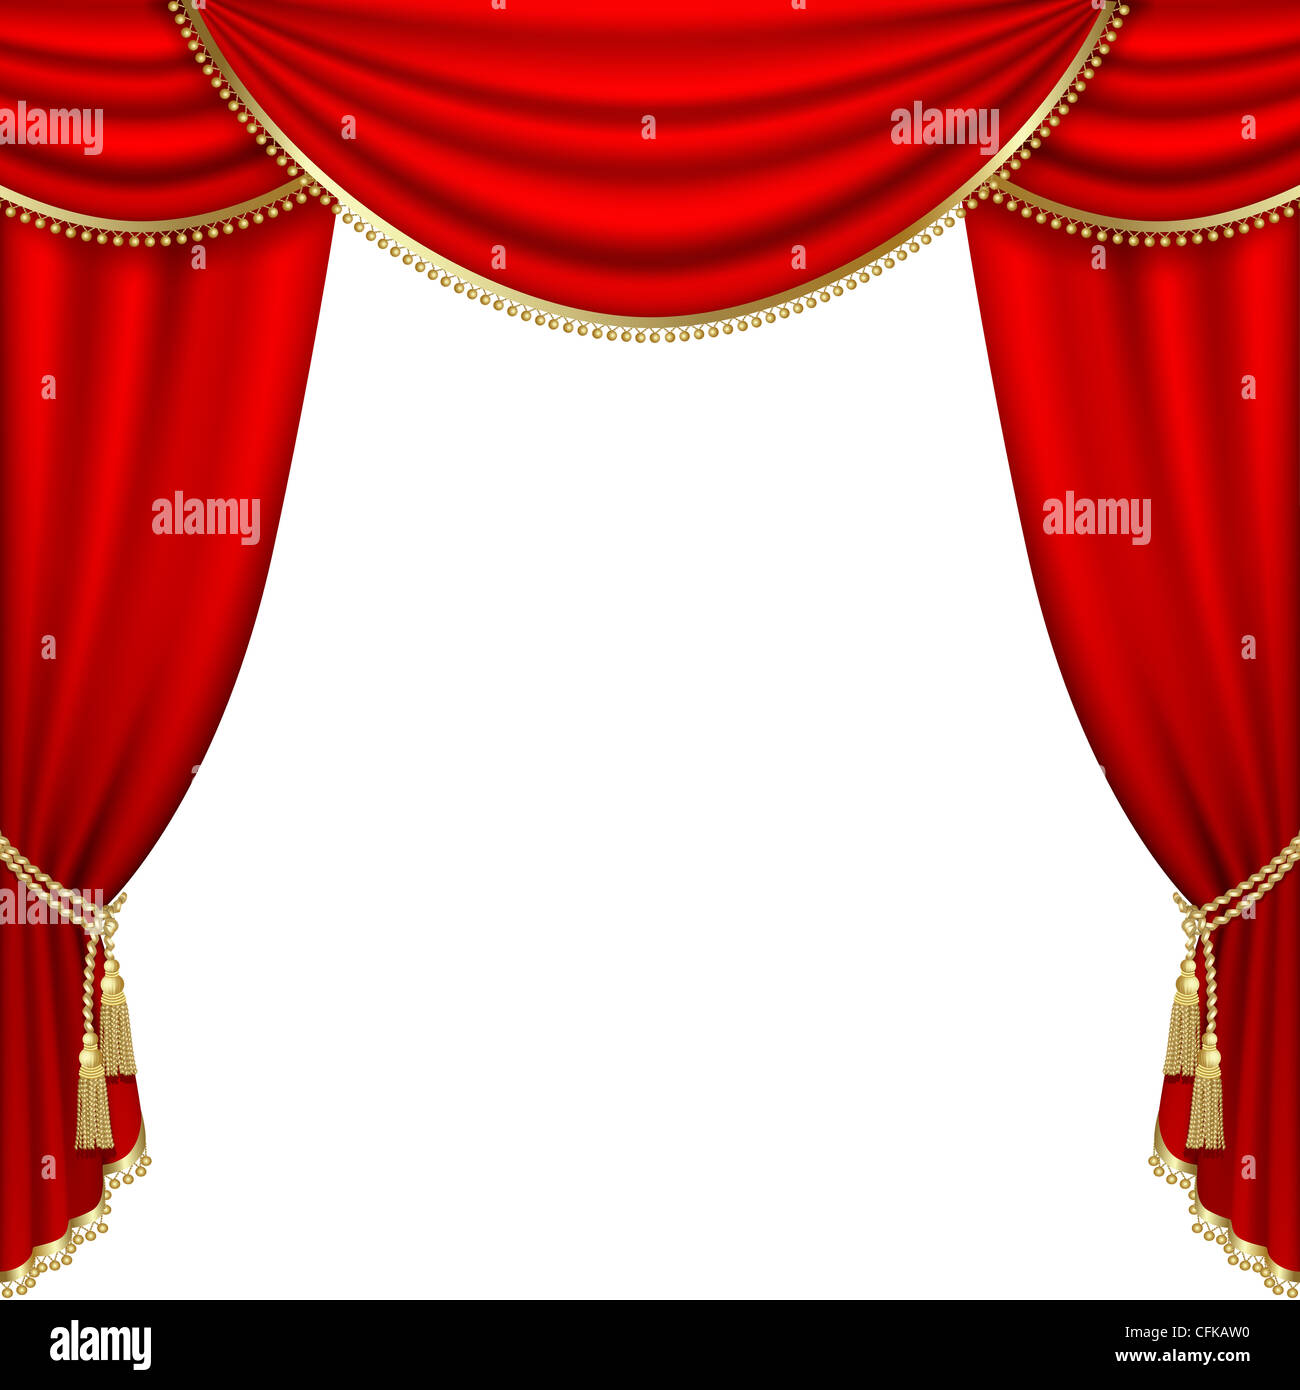 Theater stage with red curtain Stock Photo - Alamy